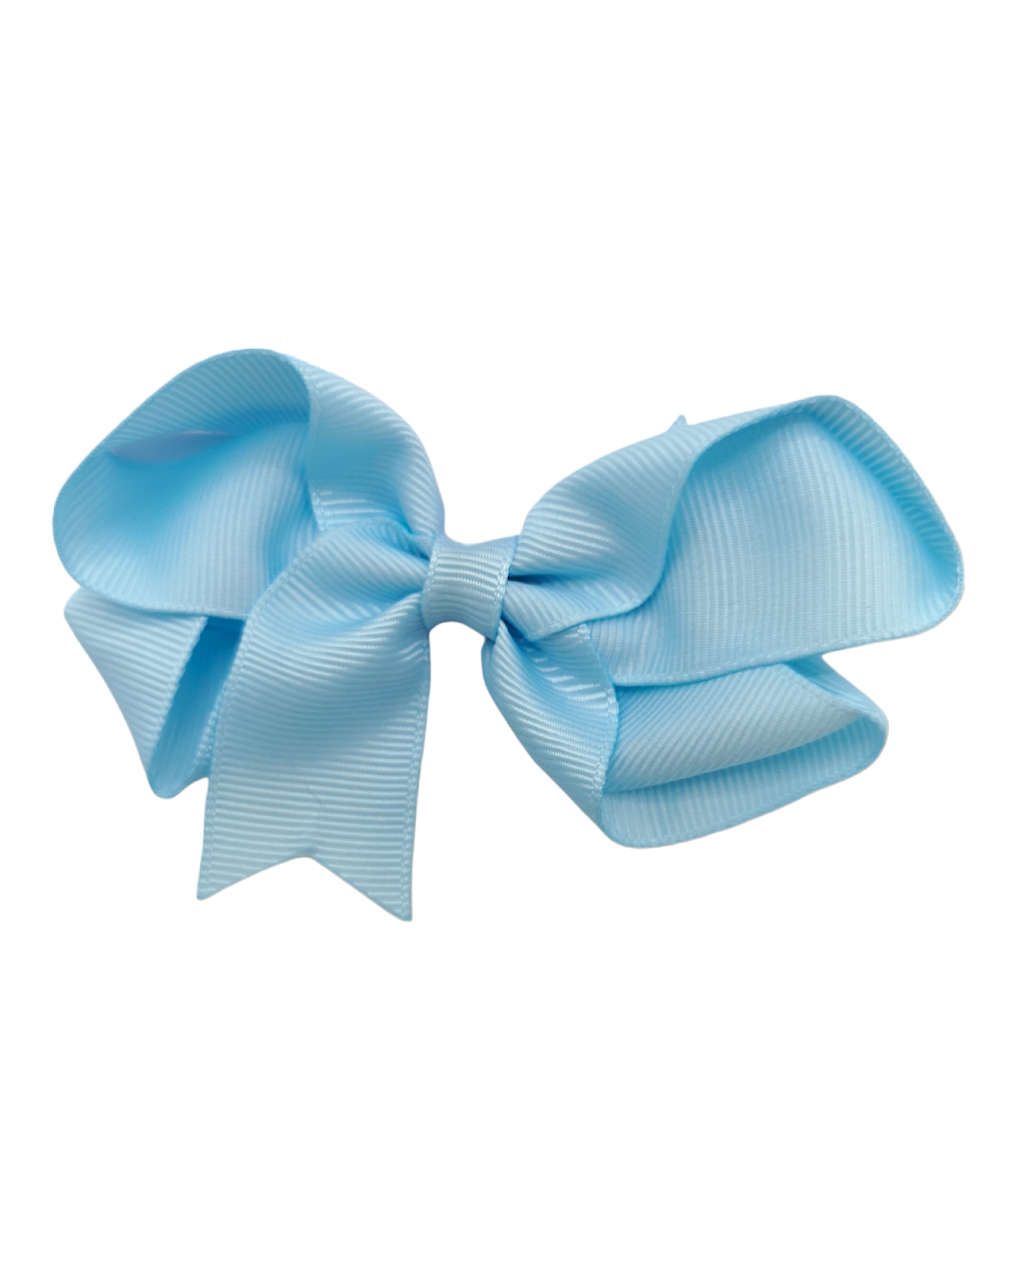 Pack of 5 - 3.5 inch bow clips - Betty Brown Boutique Ltd